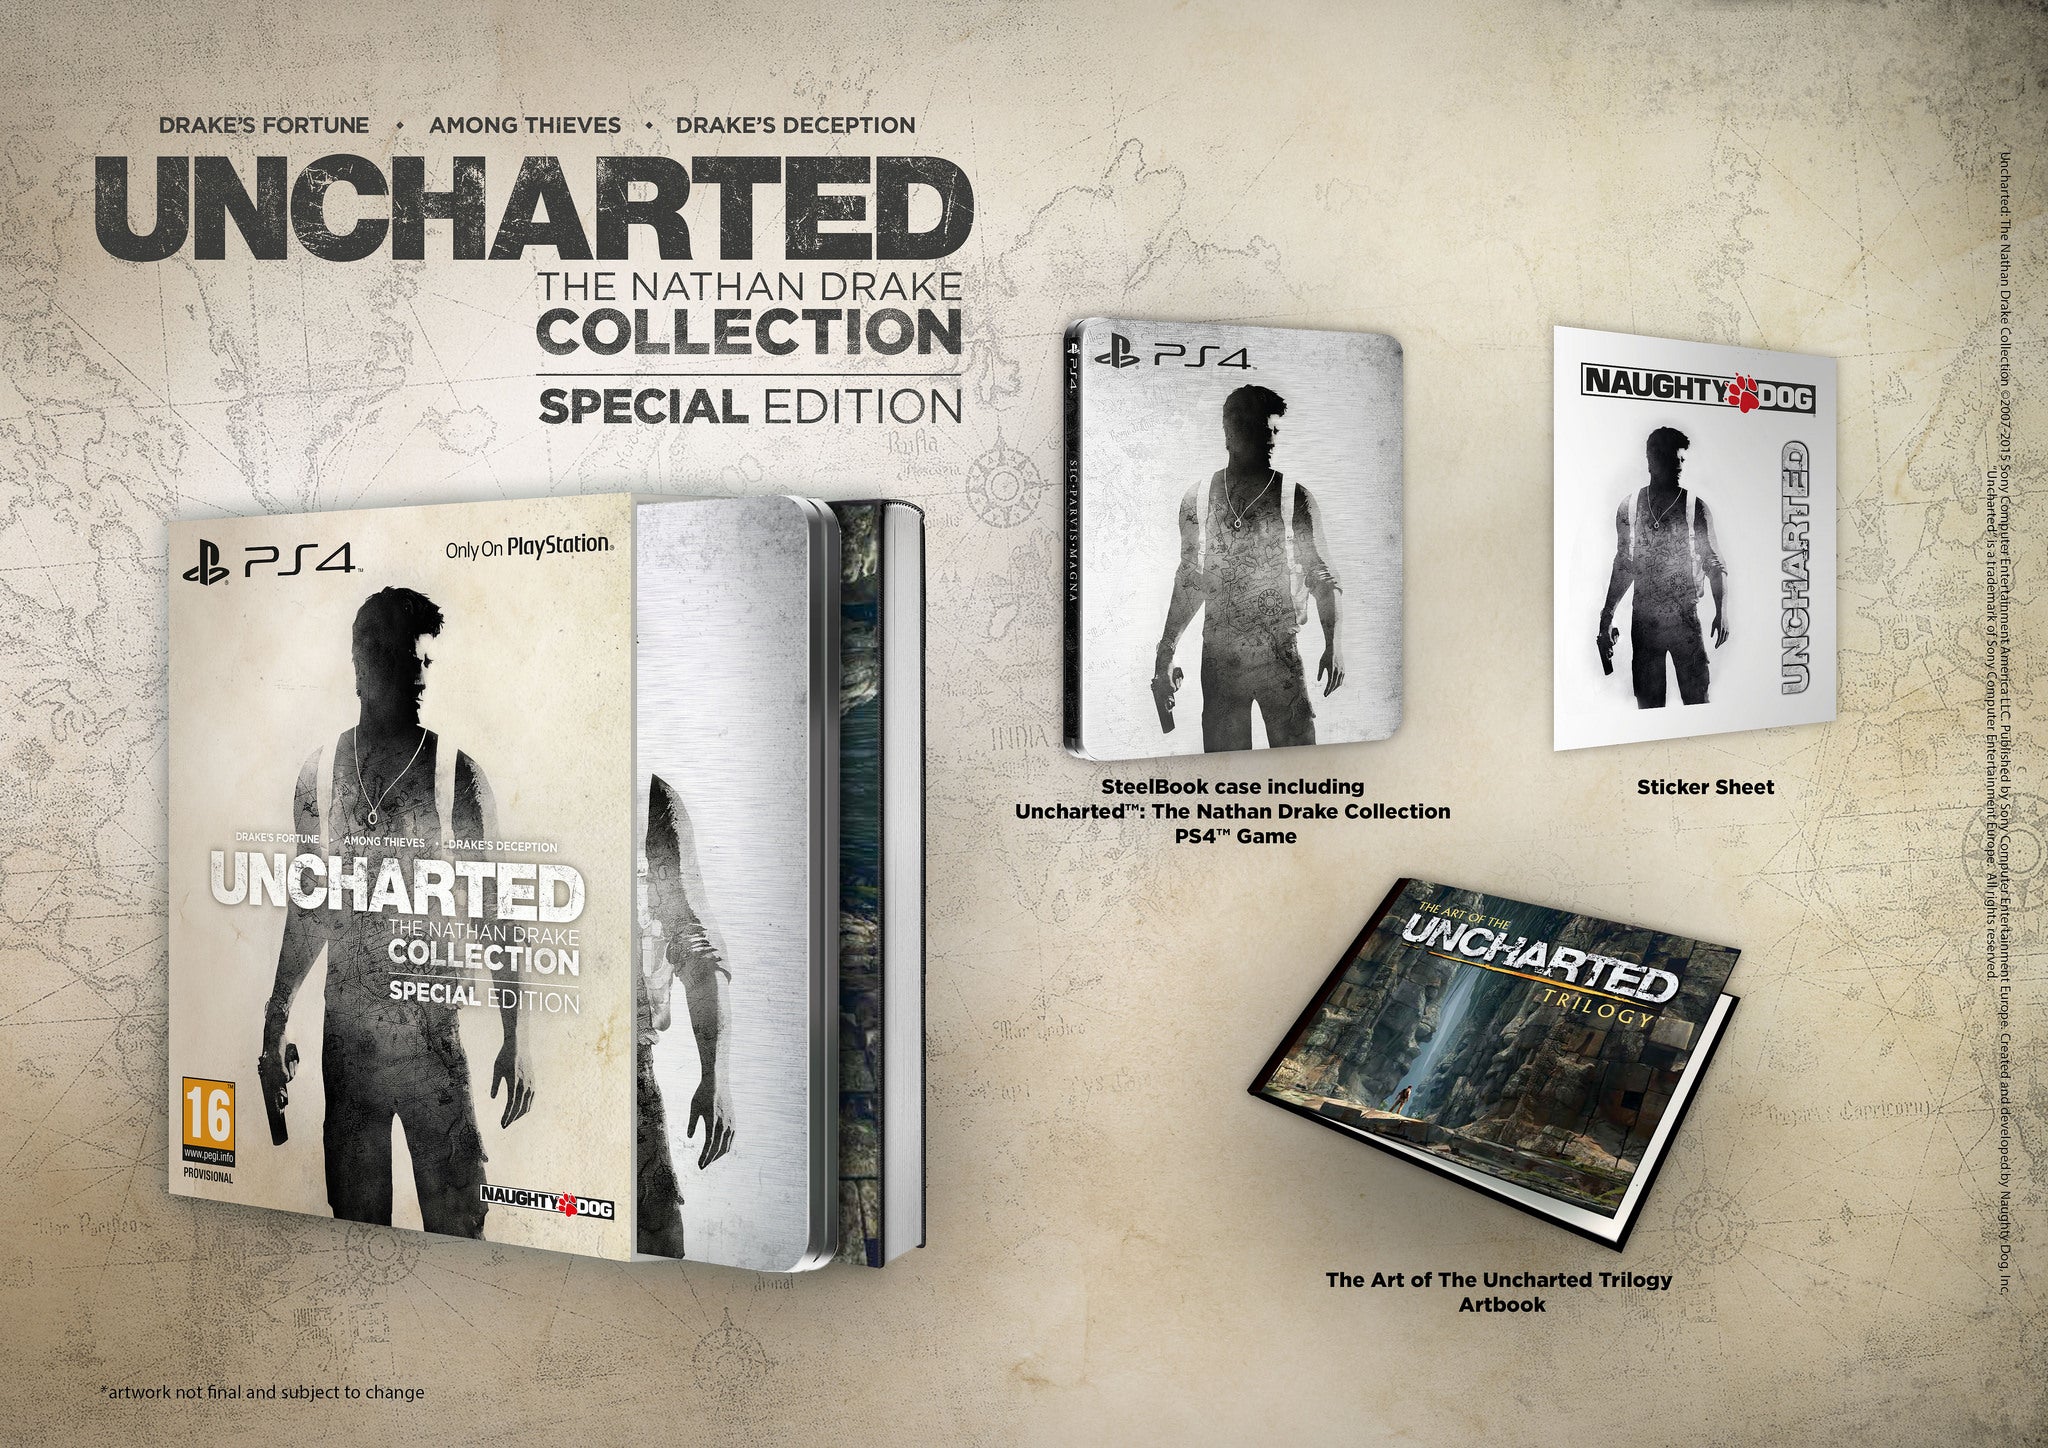 Image for Uncharted: The Nathan Drake Collection Special Edition announced for Europe